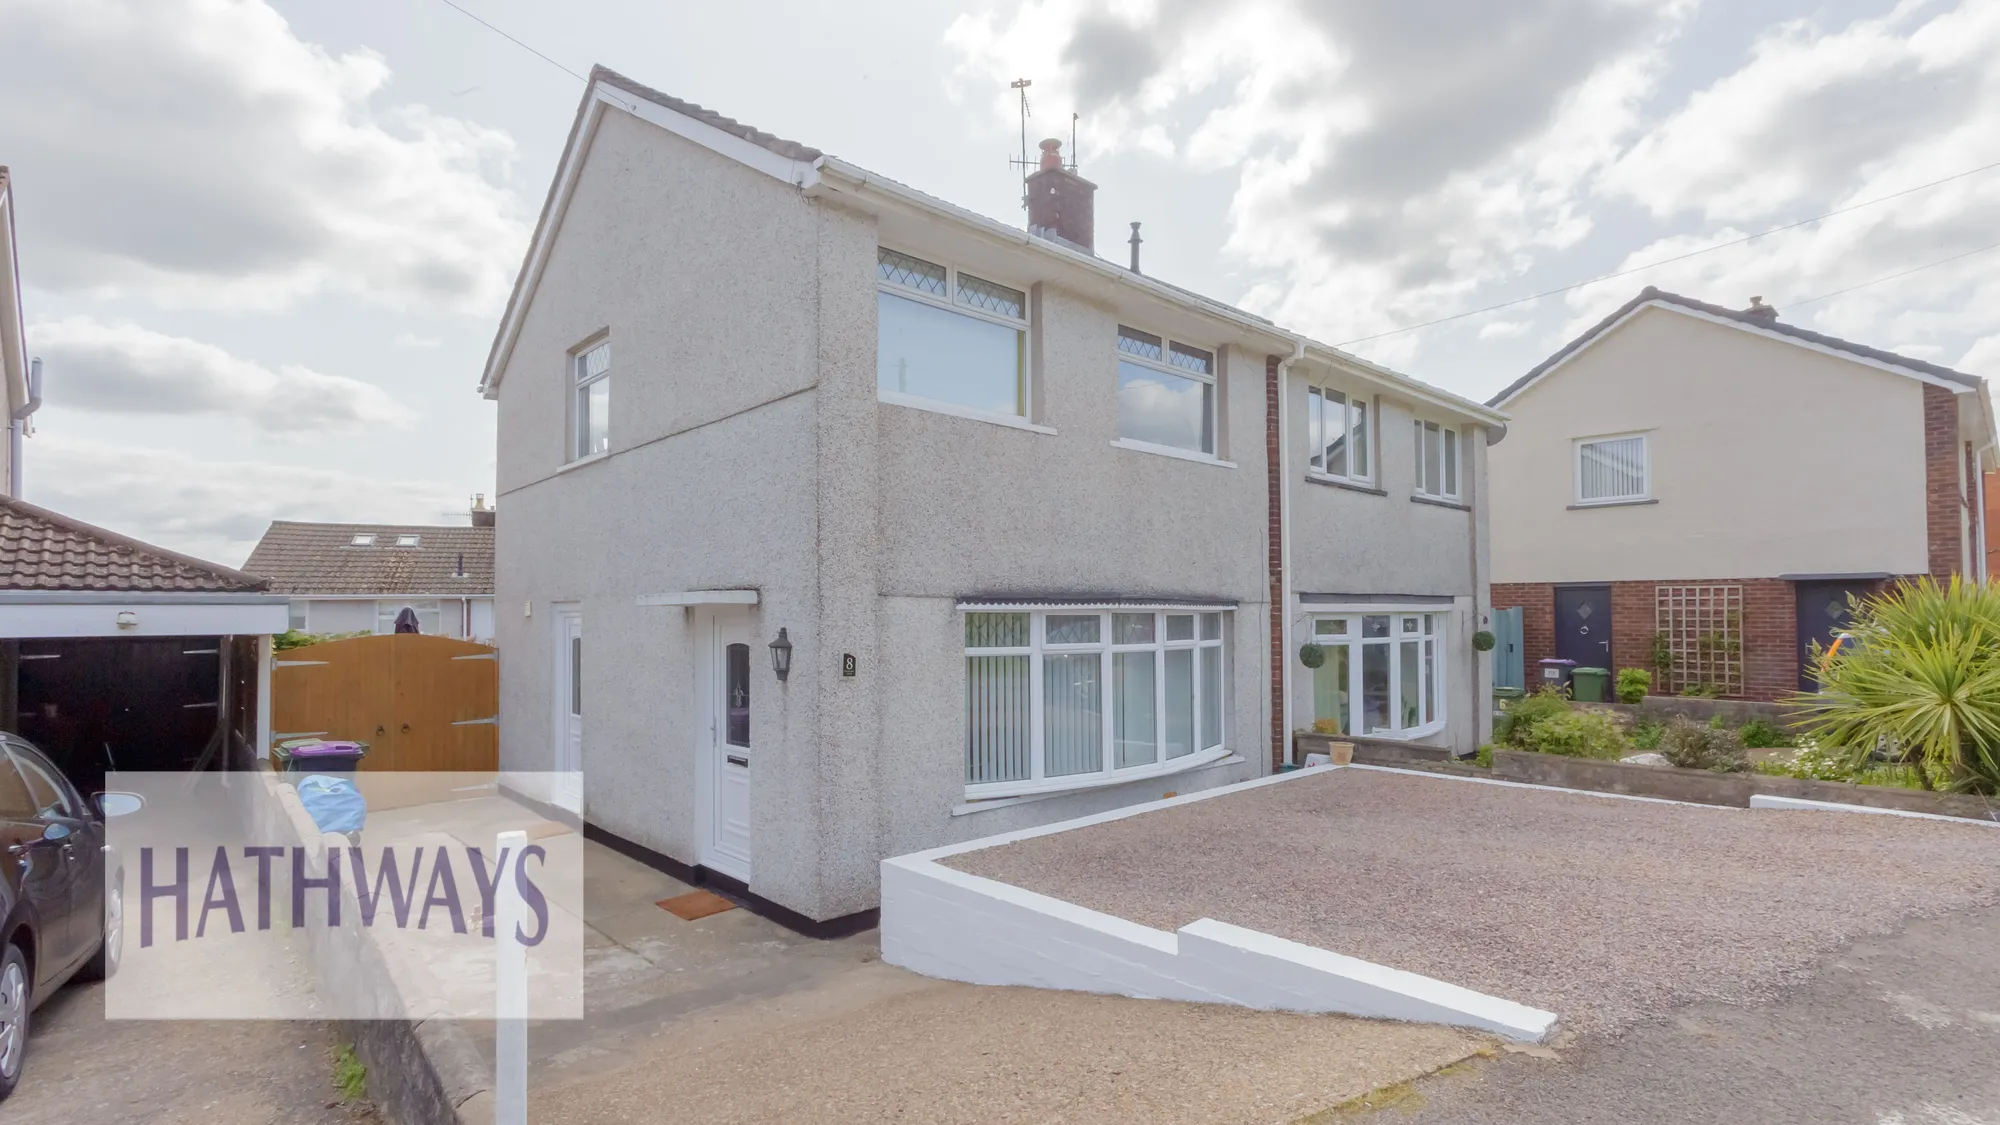 3 bed semi-detached house for sale in Thornhill Close, Cwmbran - Property Image 1